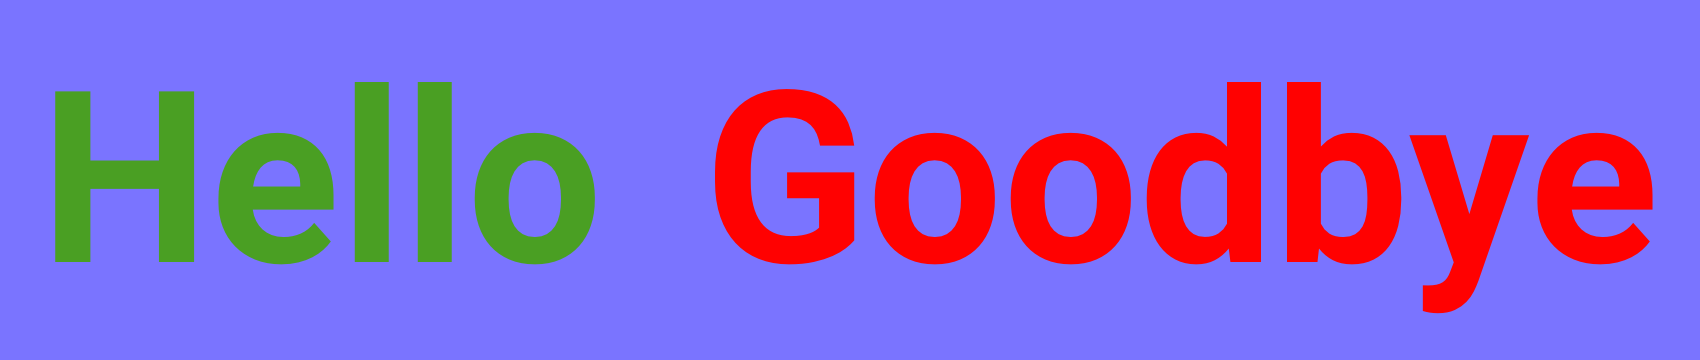 The words "Hello" in green and "Goodbye" in red written on a blue background